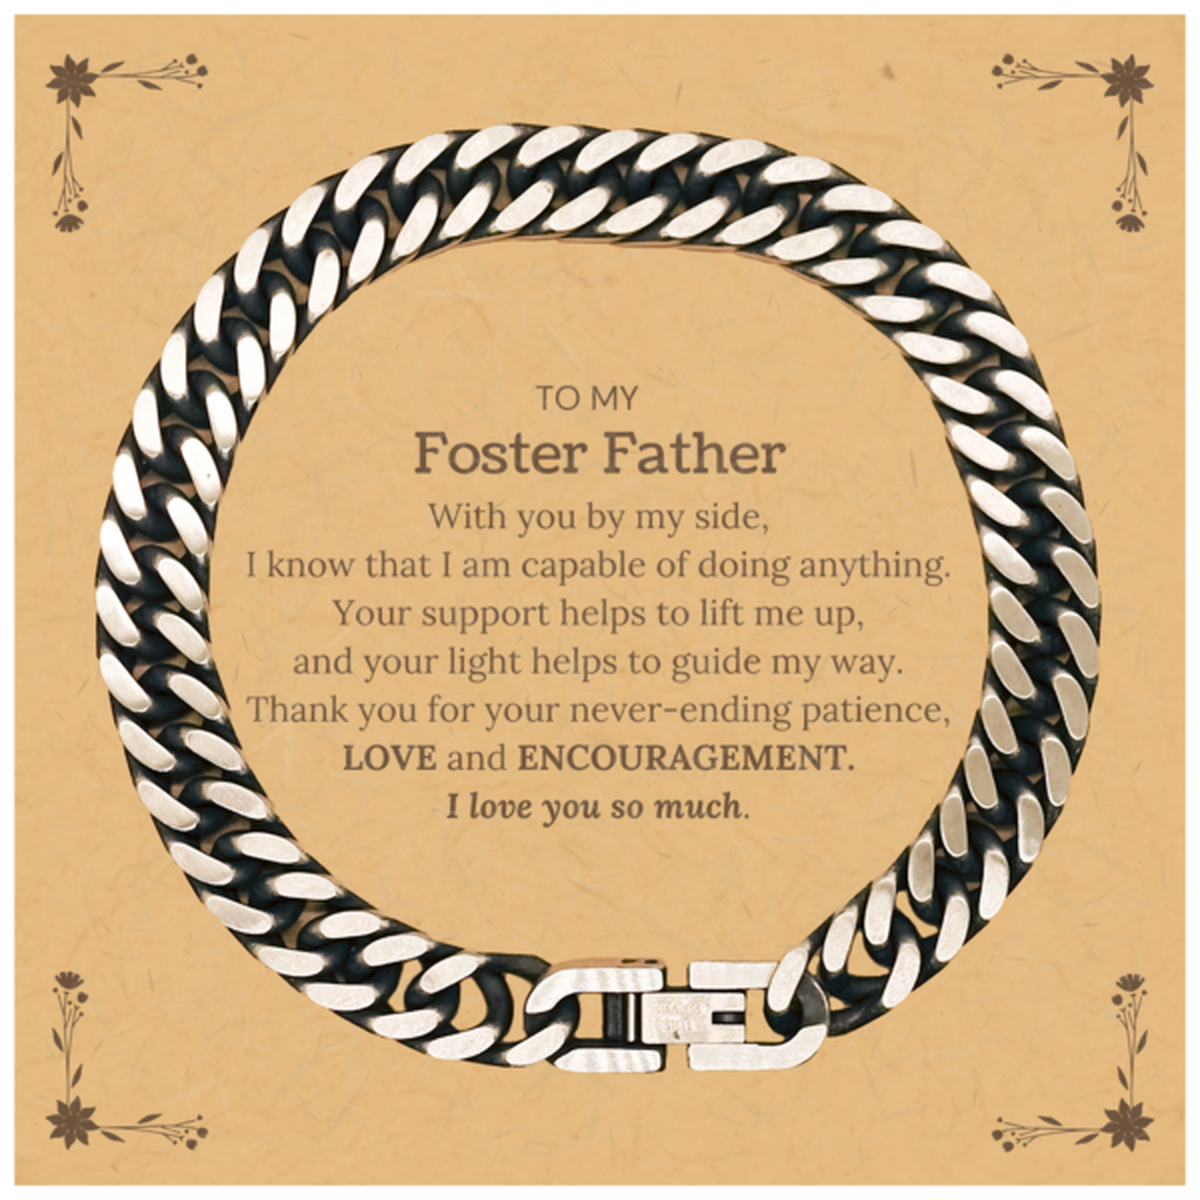 Appreciation Foster Father Cuban Link Chain Bracelet Gifts, To My Foster Father Birthday Christmas Wedding Keepsake Gifts for Foster Father With you by my side, I know that I am capable of doing anything. I love you so much